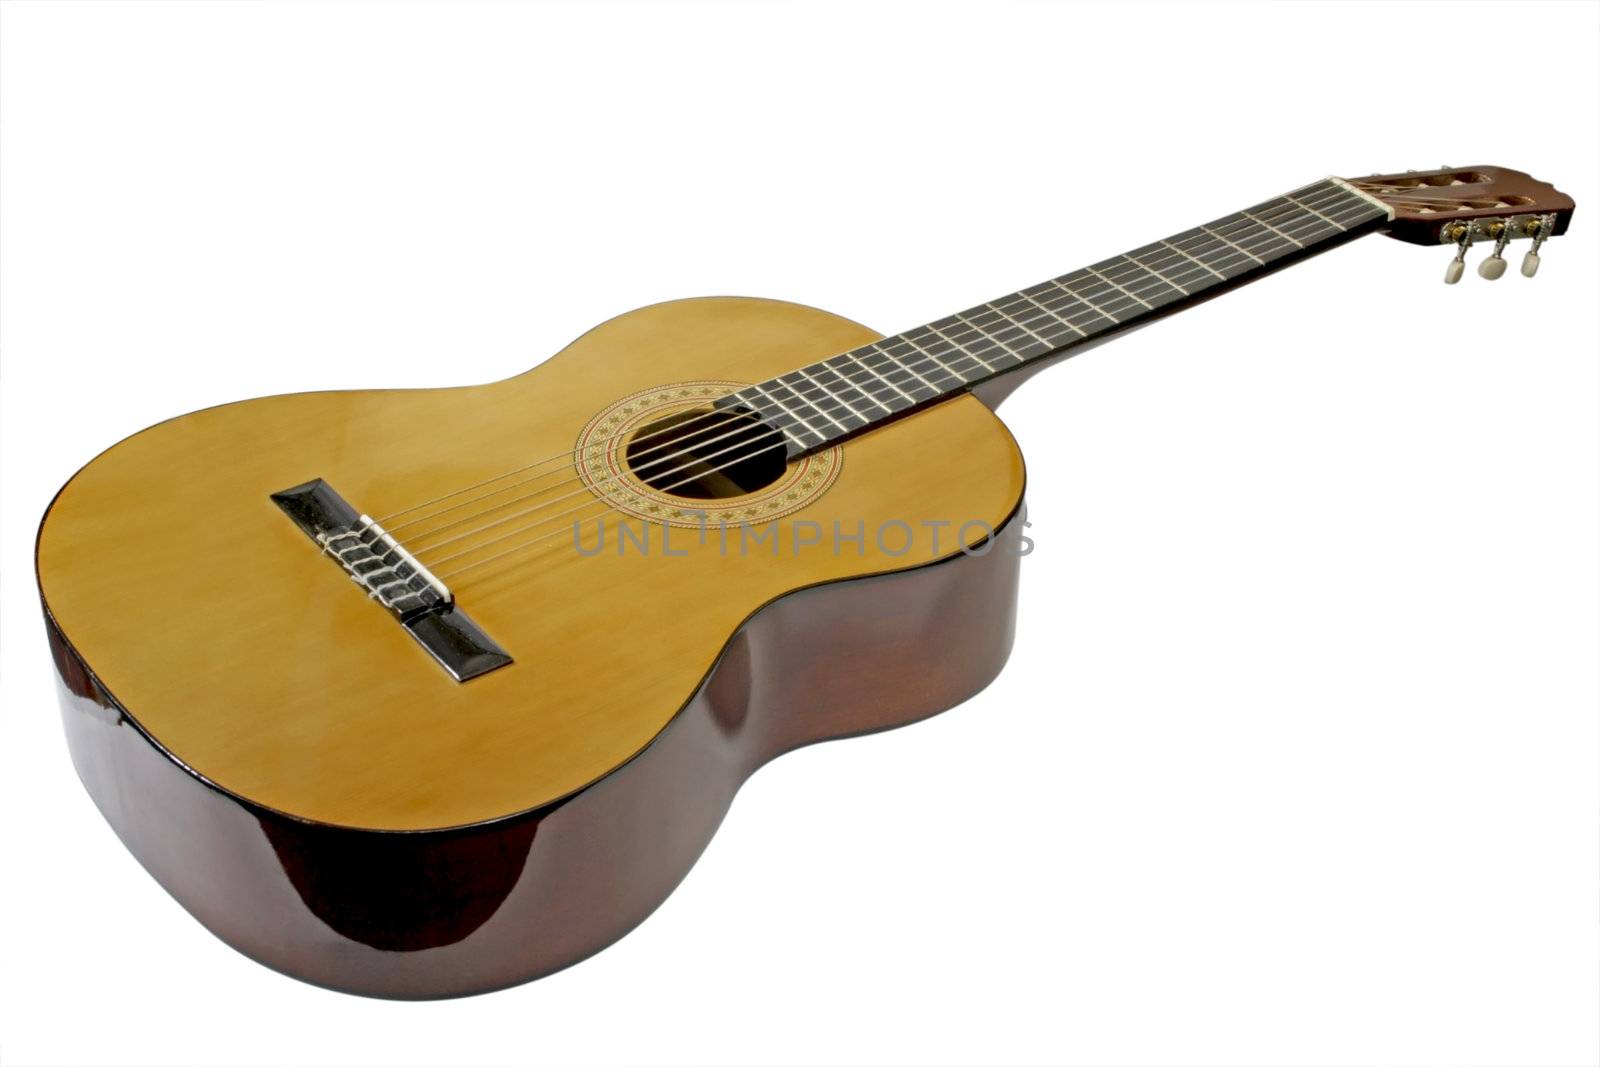 Acoustic guitar by Teamarbeit